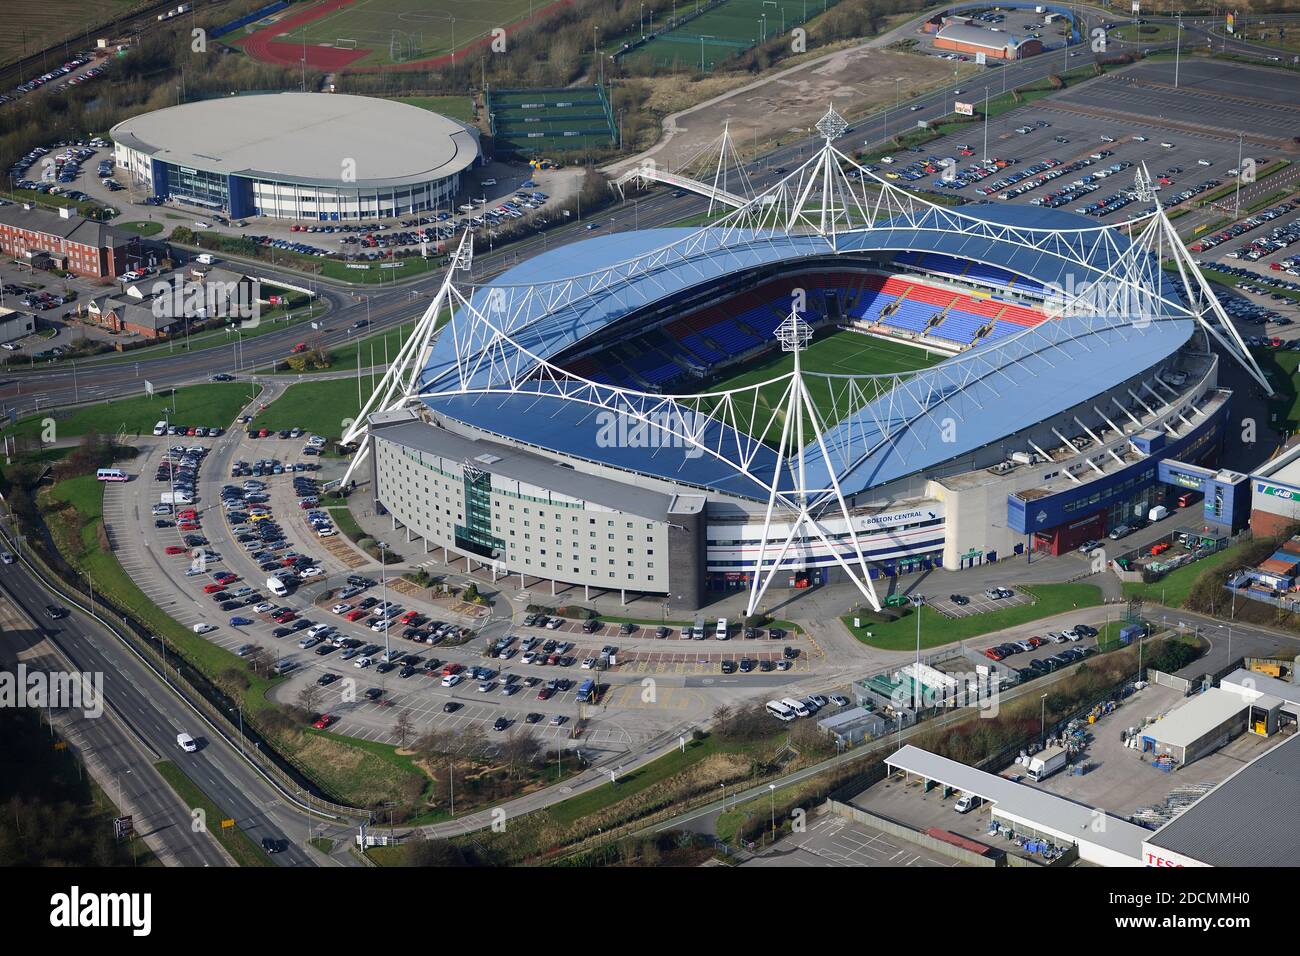 Reebok Stadium High Resolution Stock Photography and Images - Alamy